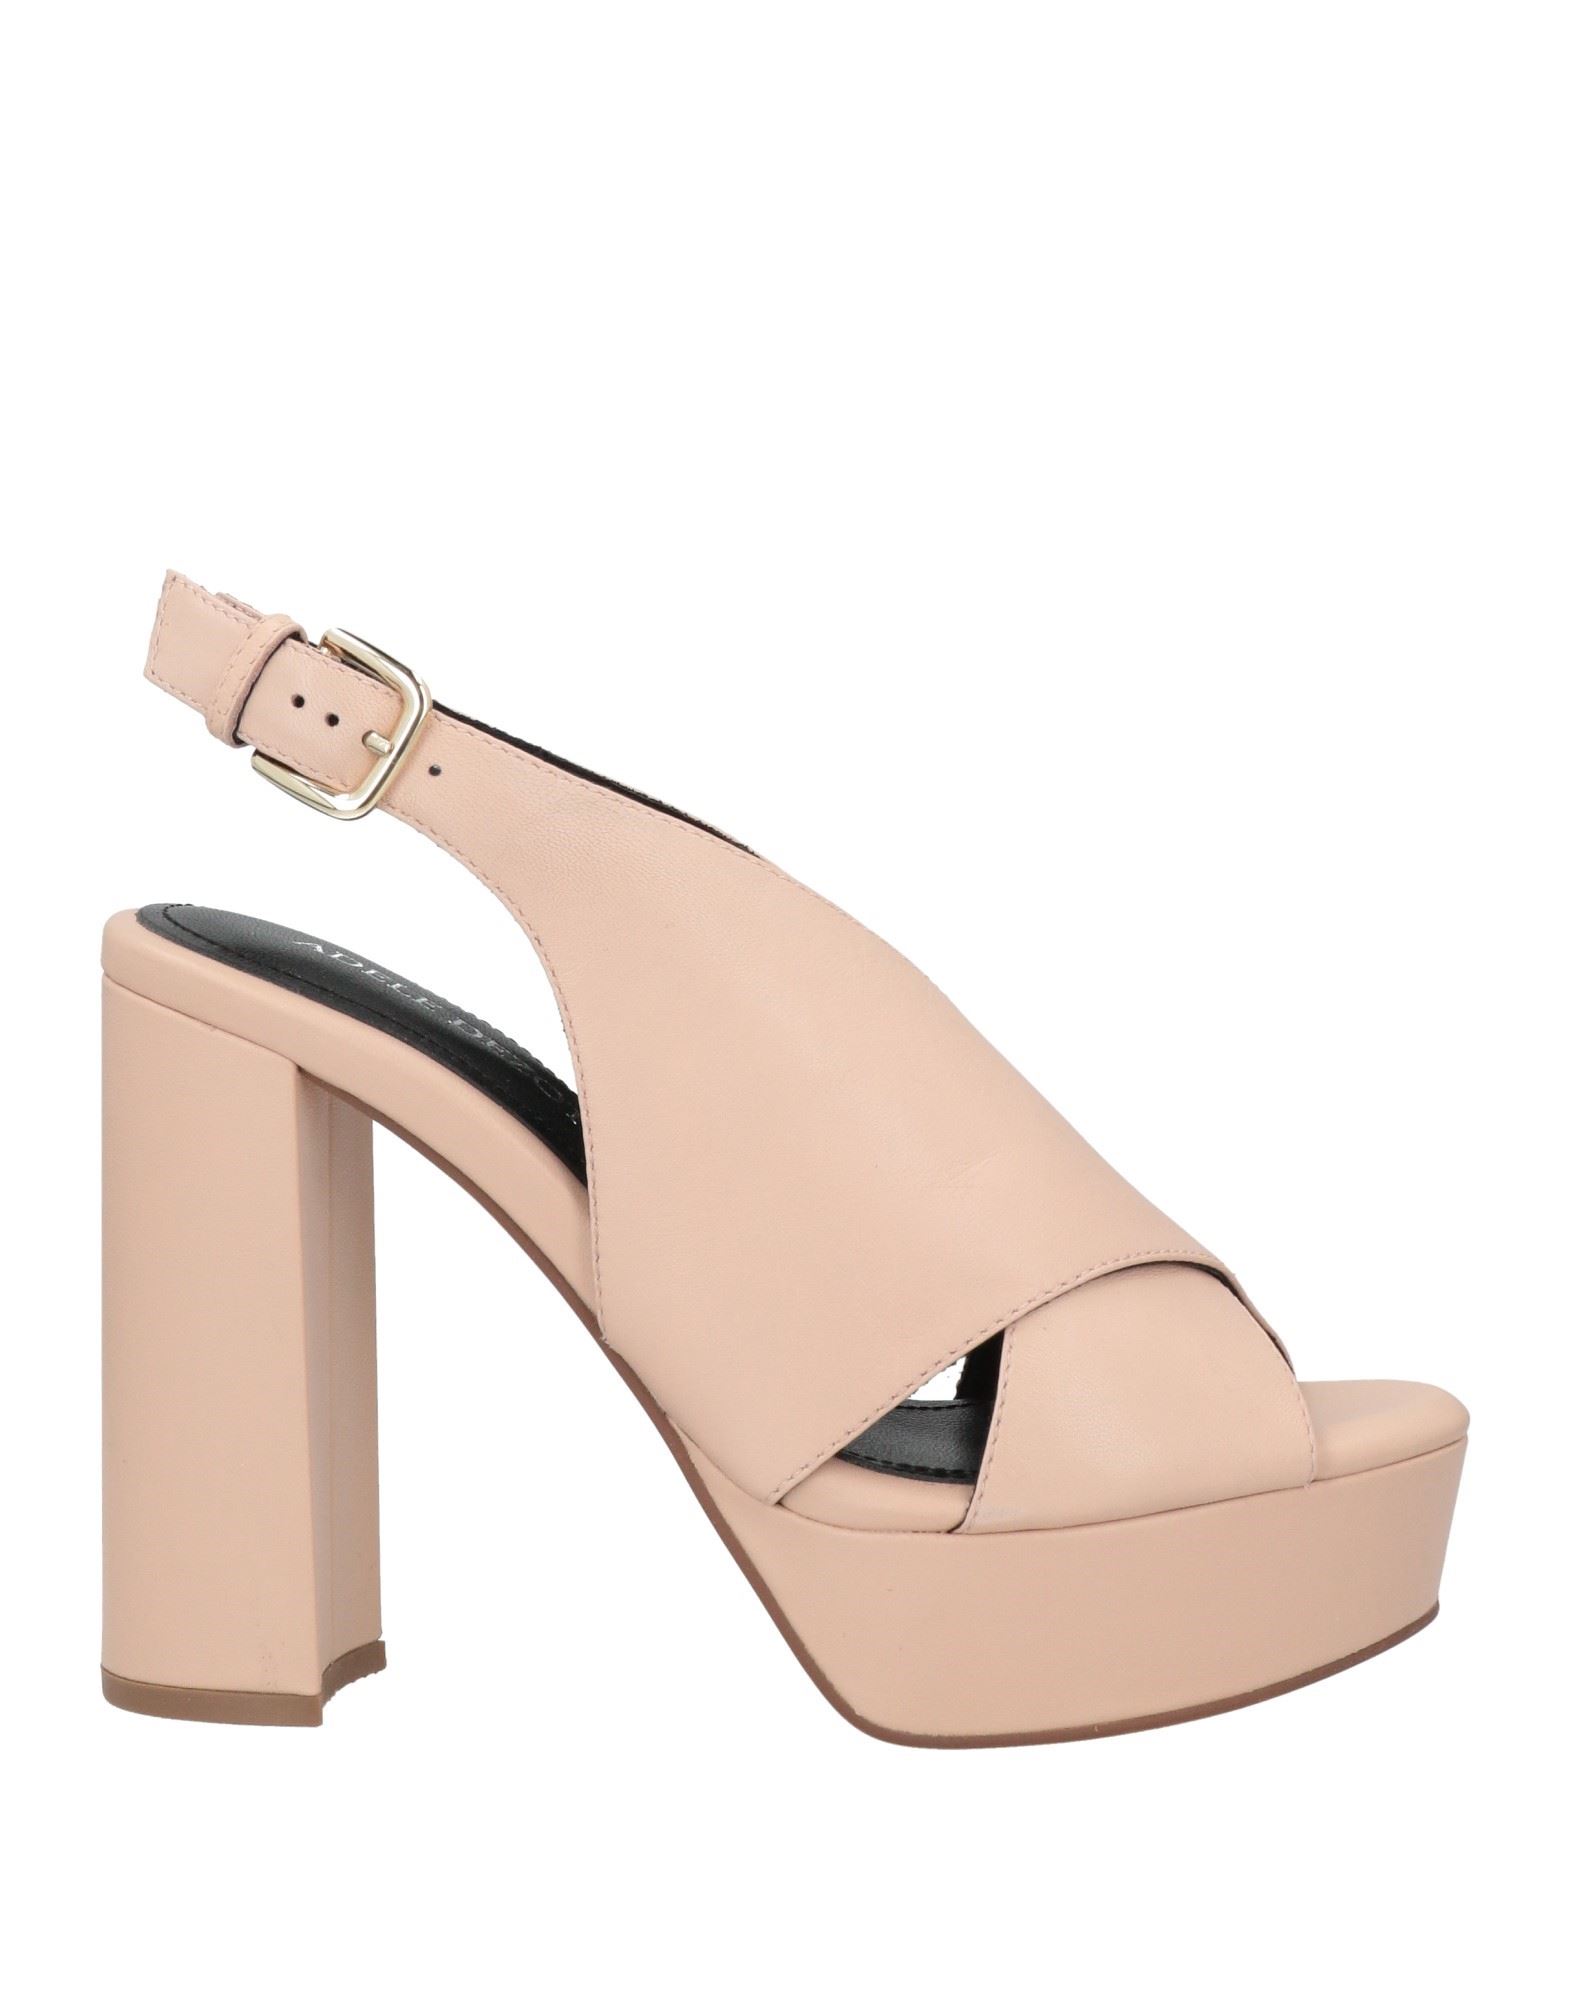 Adele Dezotti Sandals In Pink